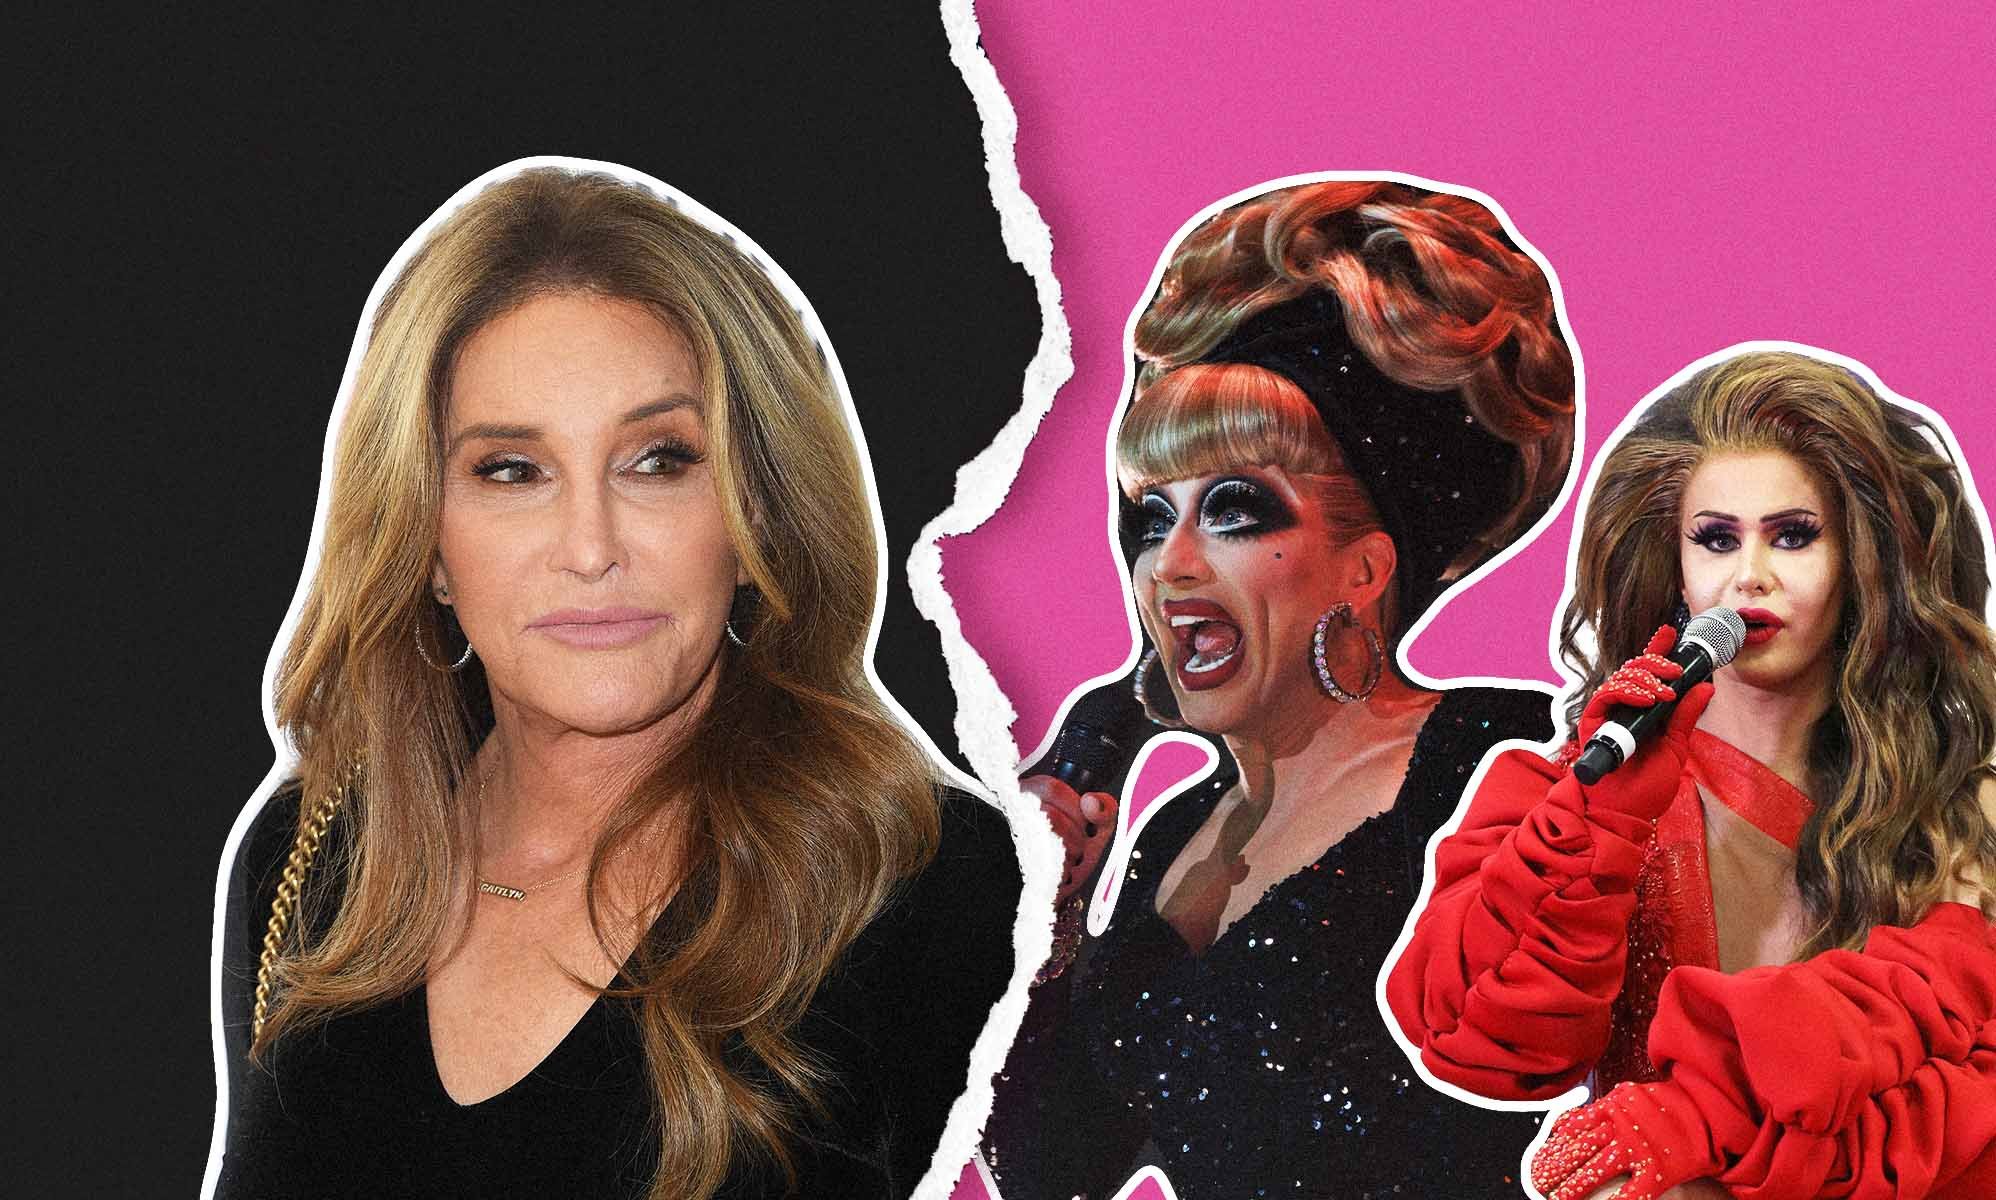 Caitlyn Jenner condemned for ‘rainbow mafia’ groomer tweets by Kerri Colby and Bianca Del Rio